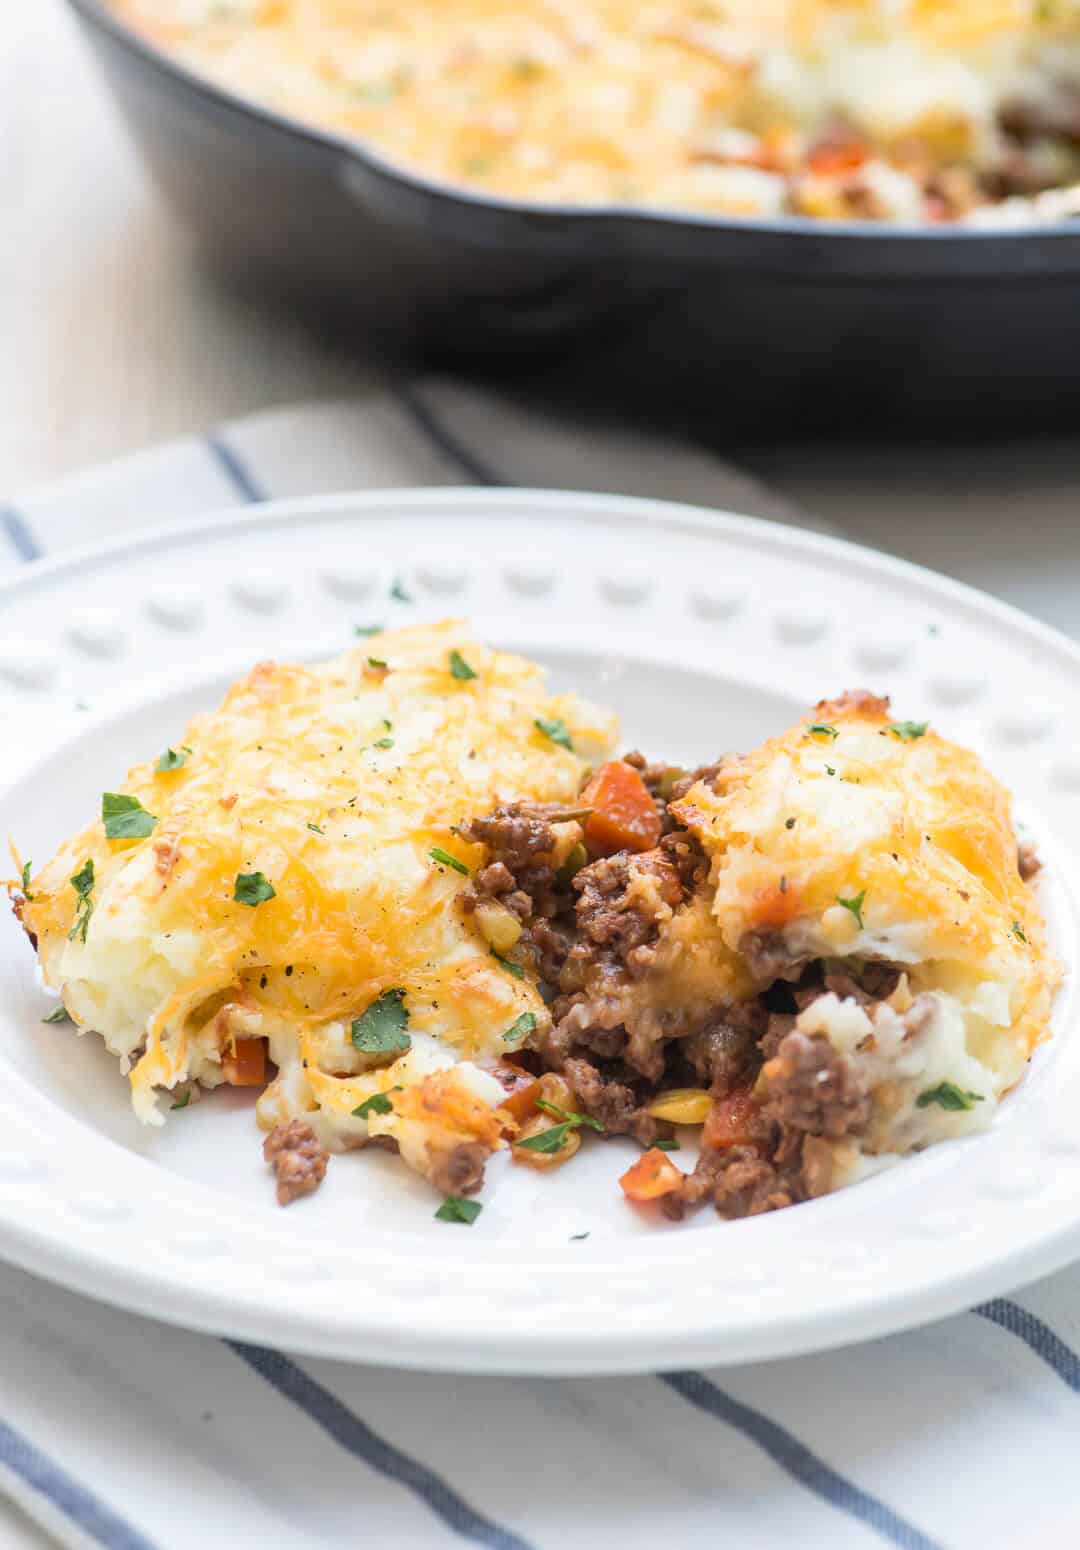 A close up image of a serving of the shepherd's pie on a white dish.